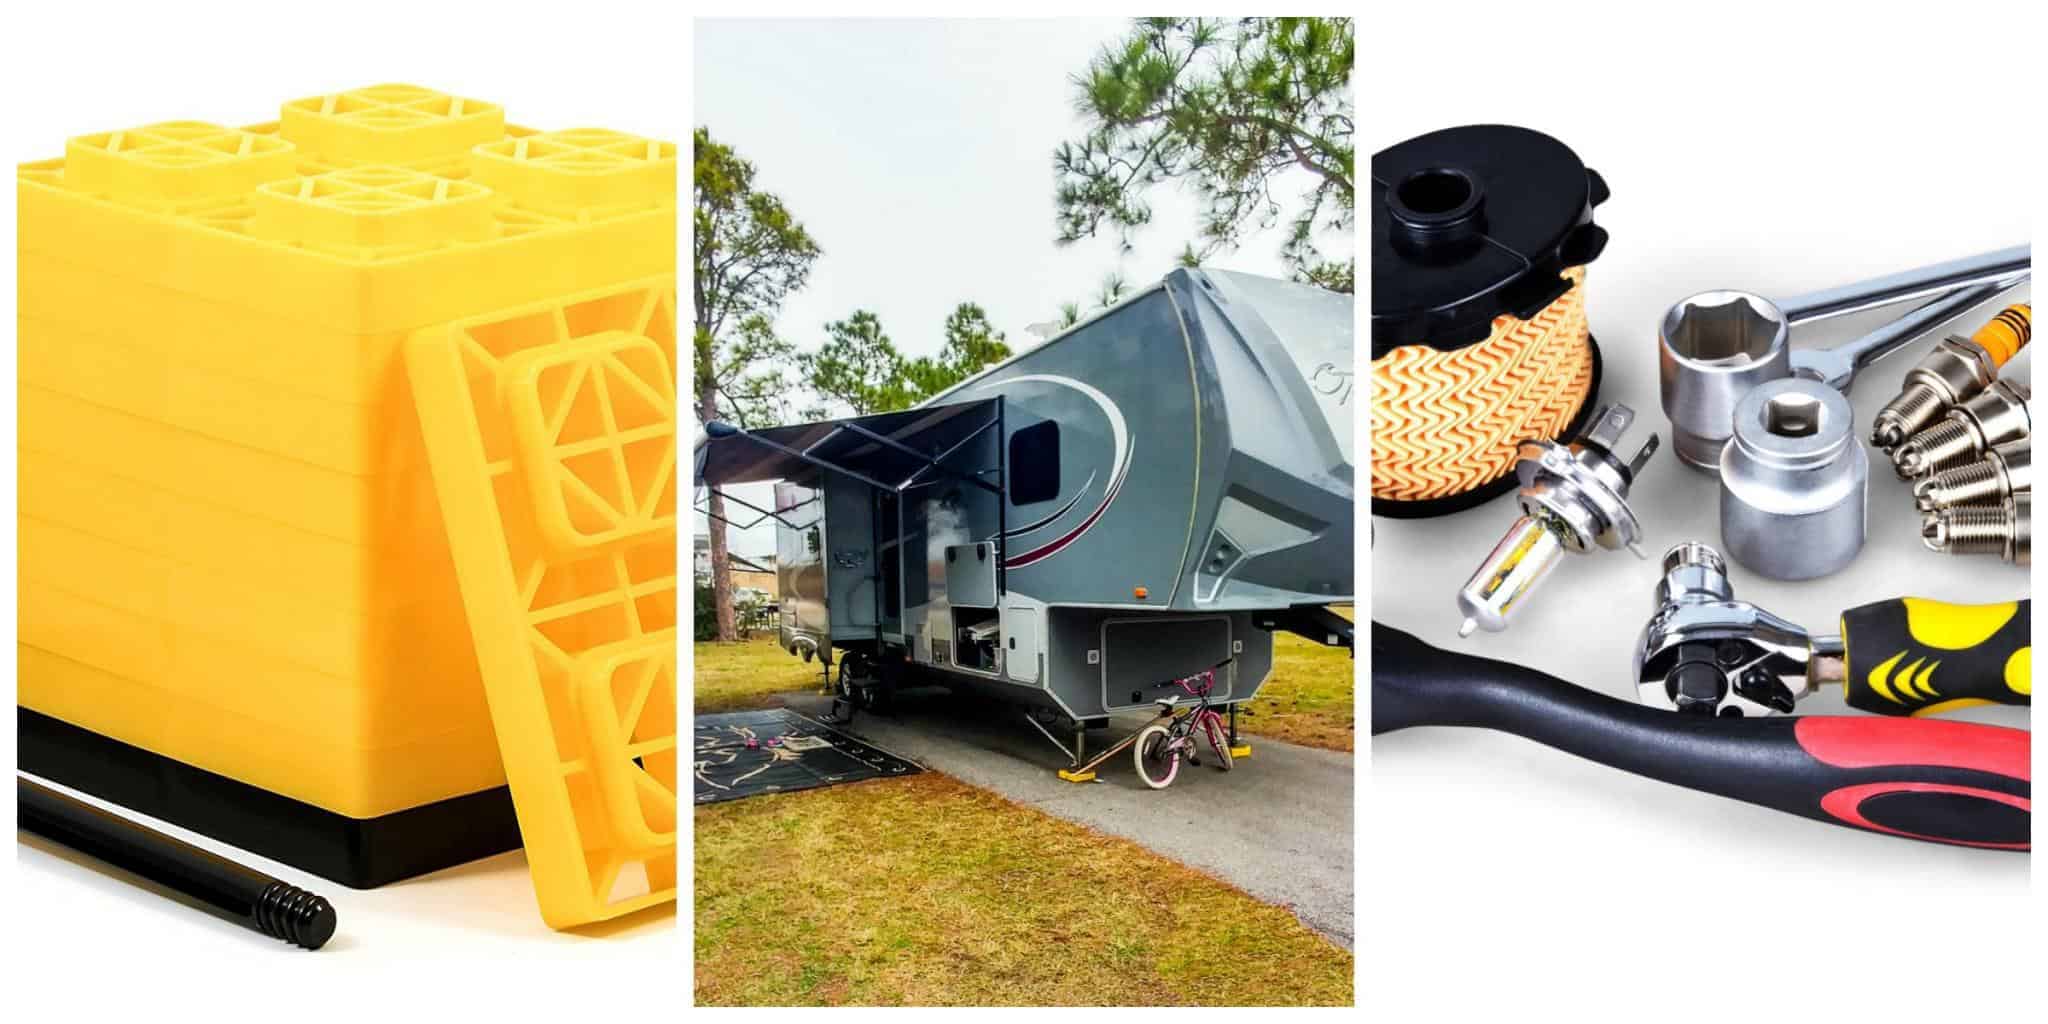 35 Must Have RV Accessories For Super Successful Camping - The Roving Foley's